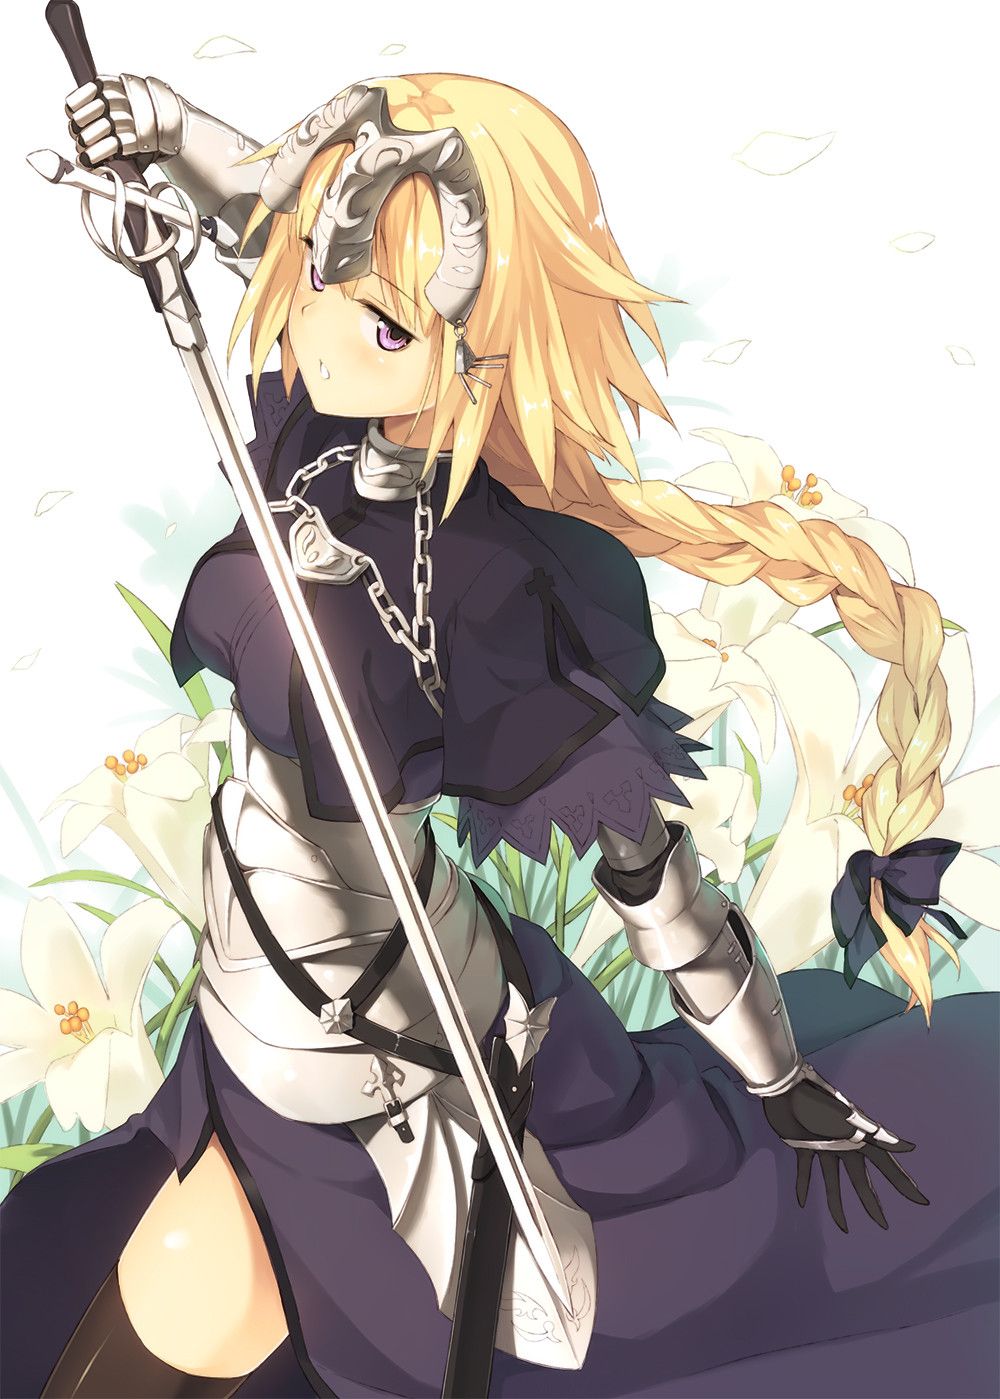 [Secondary/ZIP] Second erotic image of a girl with a weapon 27 [swords, etc.] 7